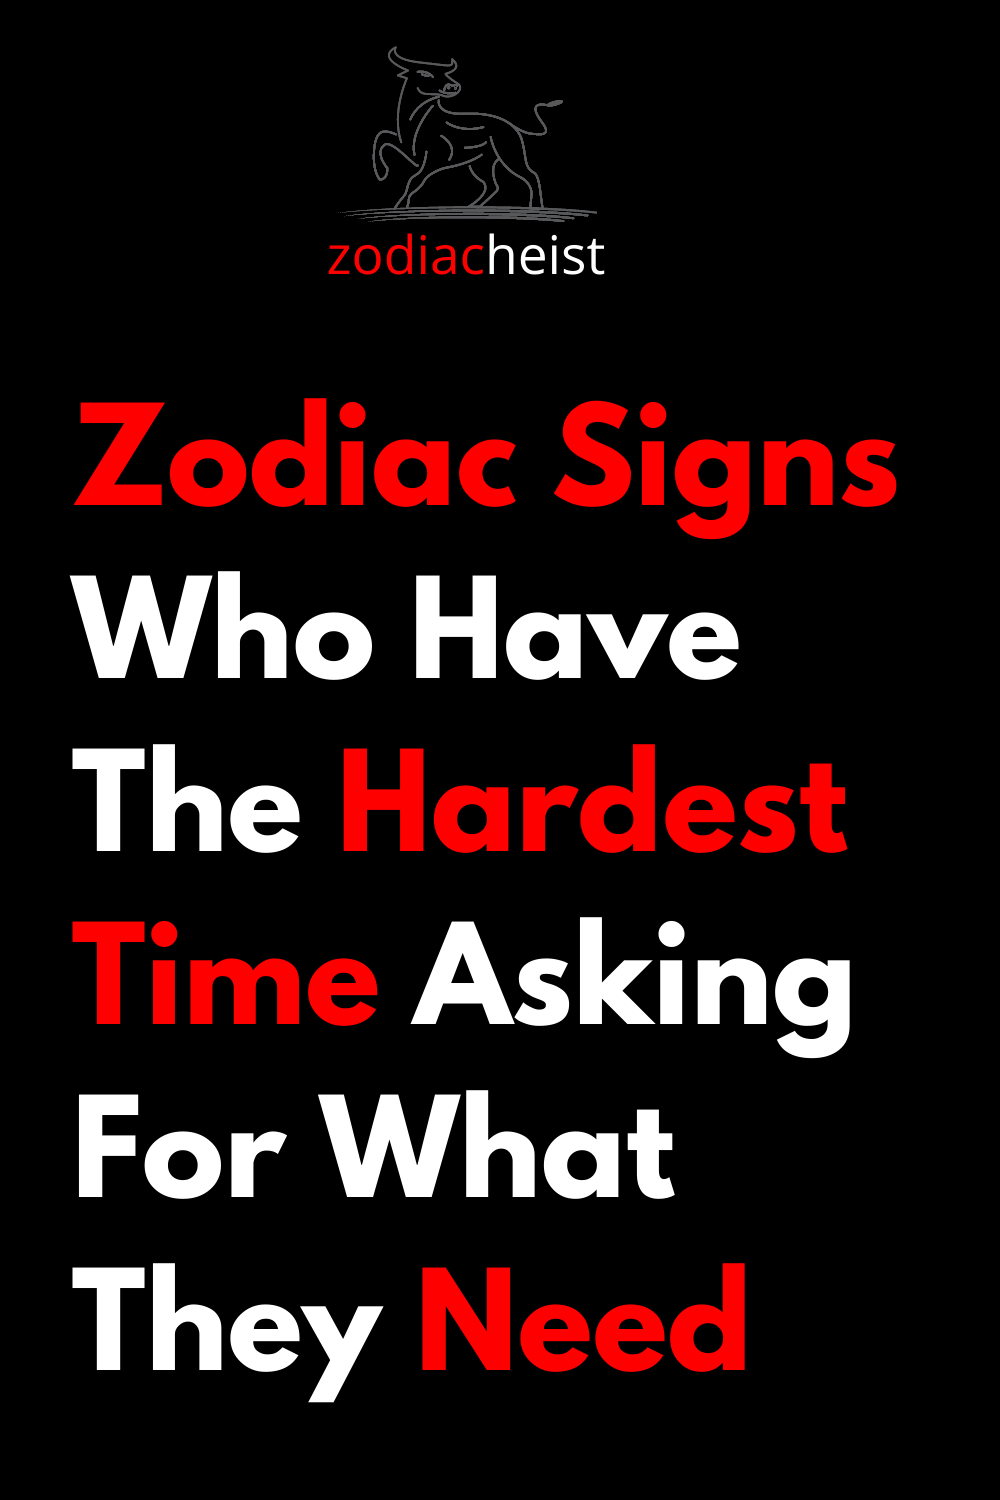 Zodiac Signs Who Have The Hardest Time Asking For What They Need